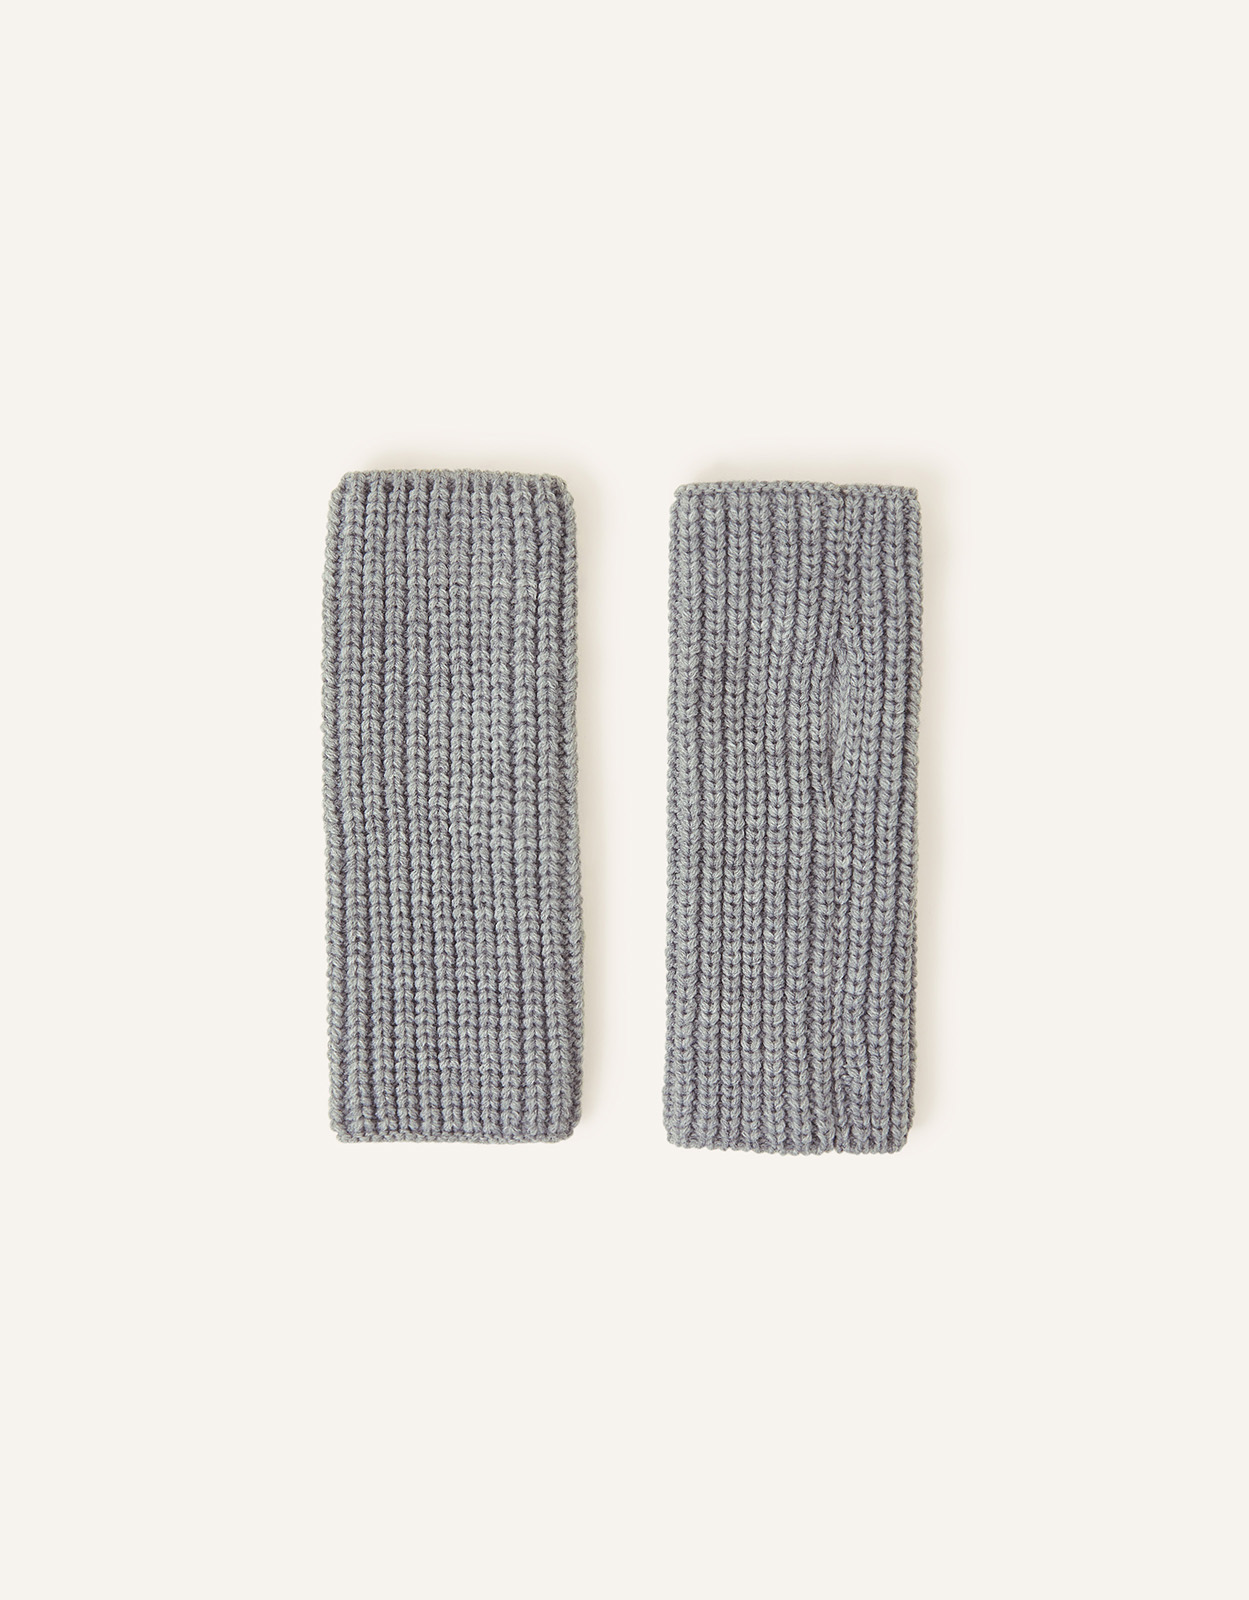 Accessorize Ribbed Cut Off Gloves Grey, Size: 8x21cm